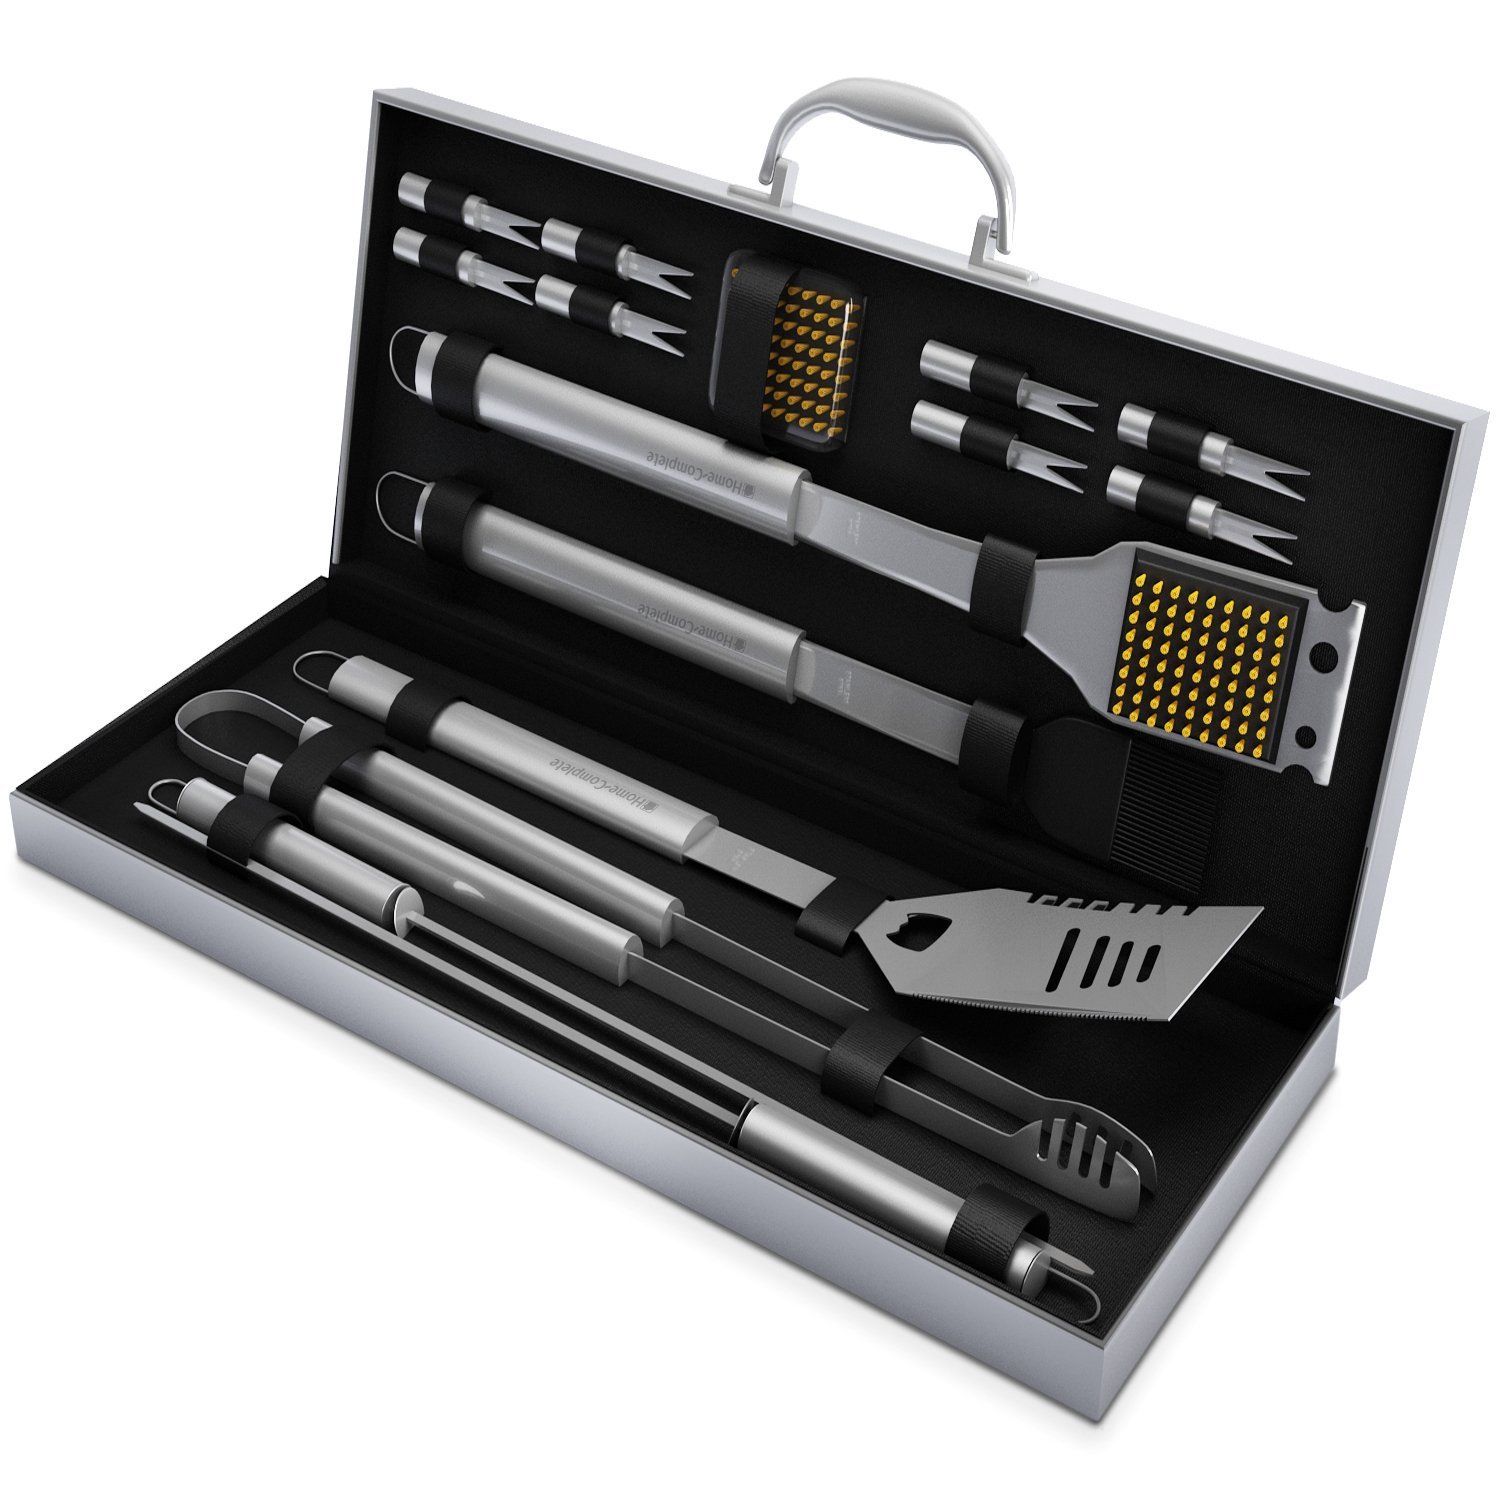 BBQ Grill Tools Set | 25+ Gifts for Him